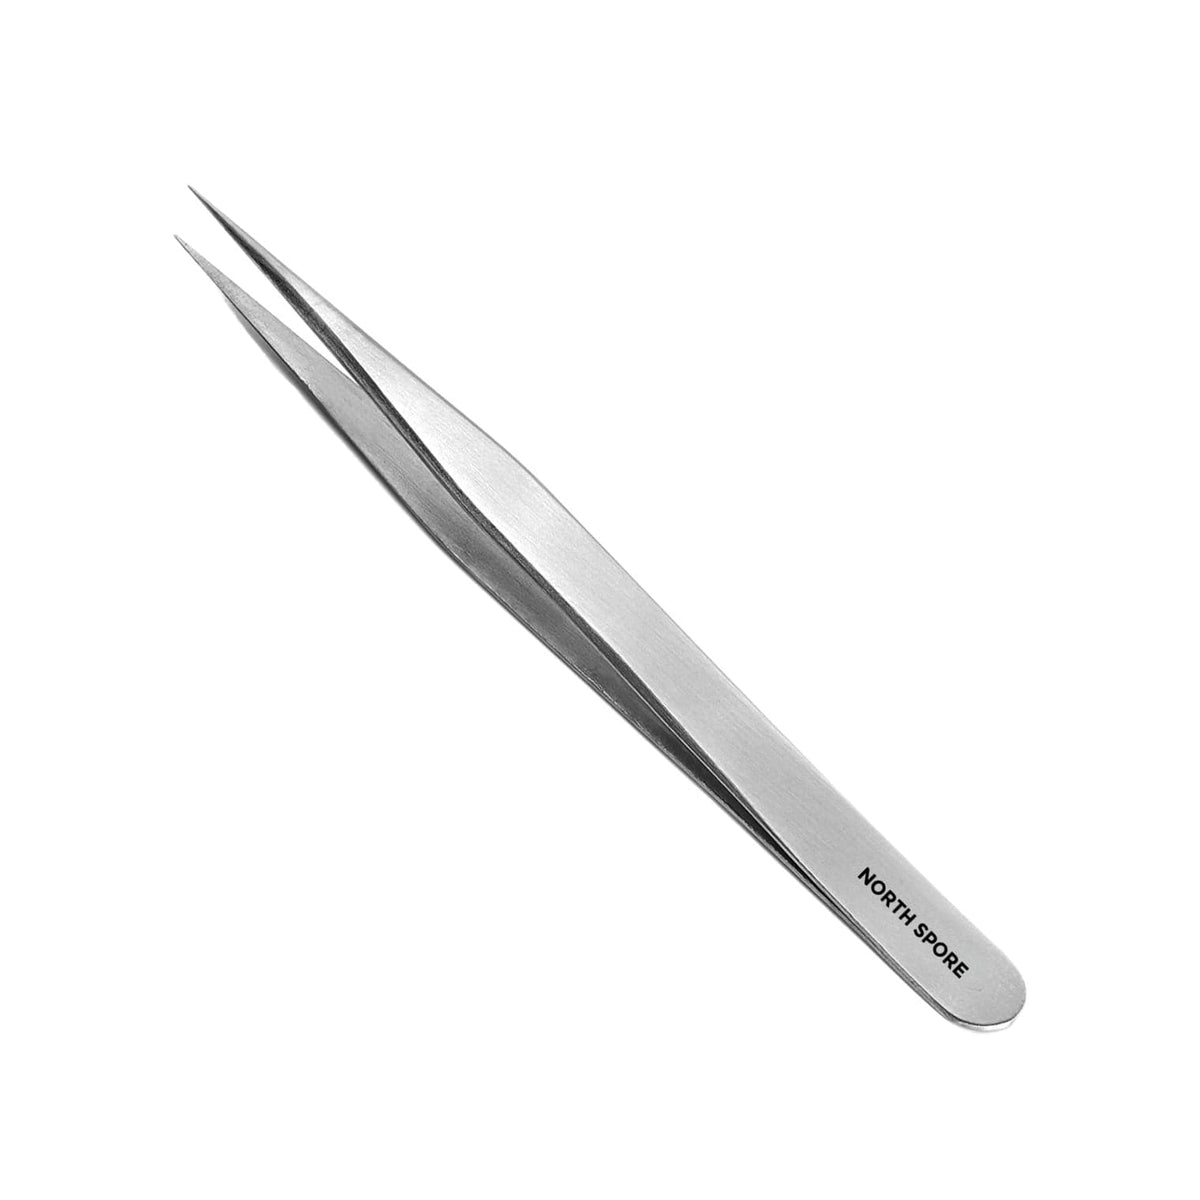 Stainless Steel High-Precision Needle-Nose Tweezers